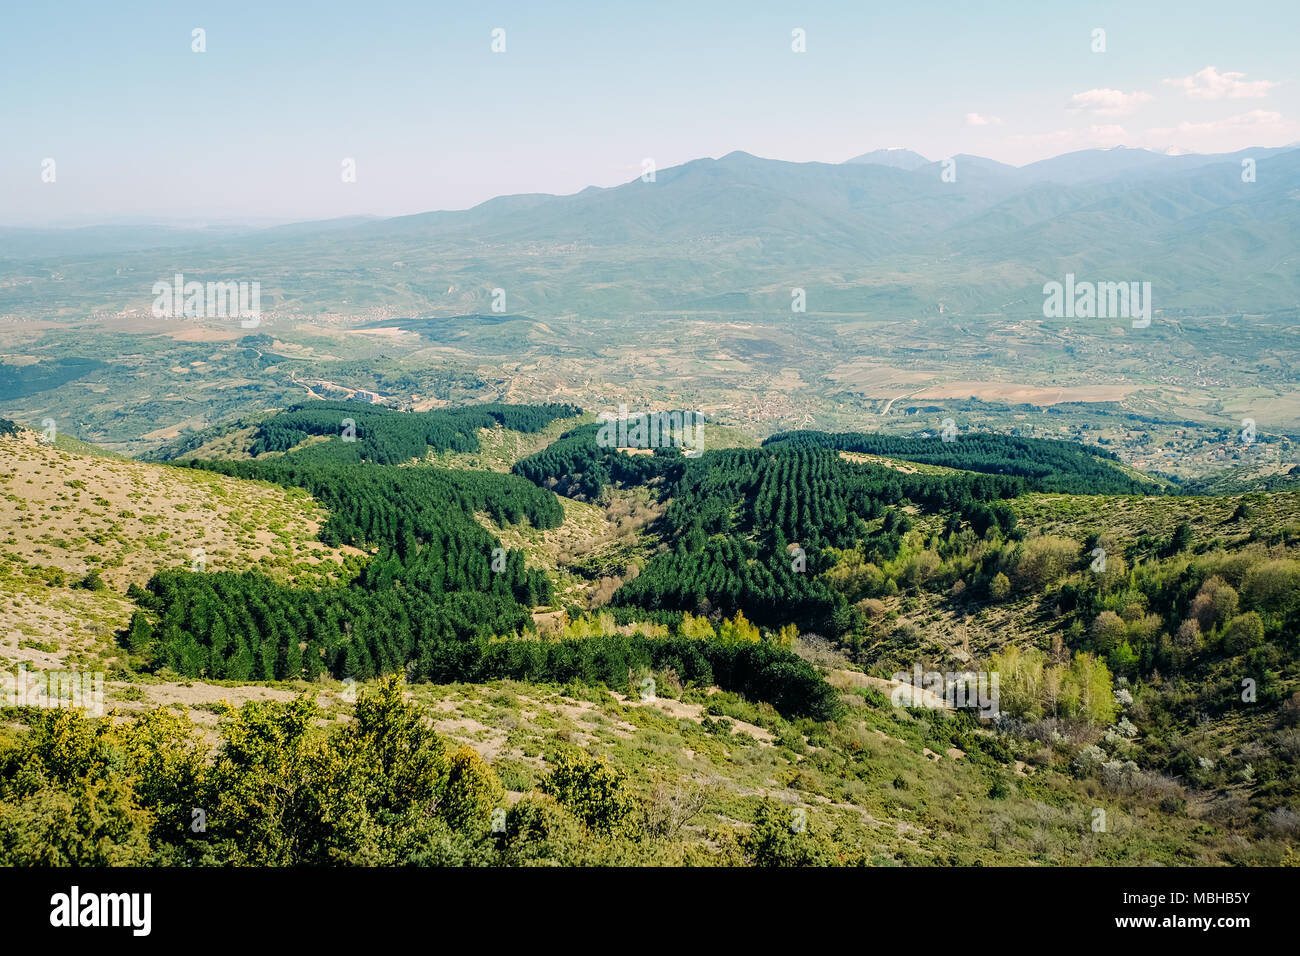 Overview of mountains in Skopje, Macedonia from Vodno mountain. Stock Photo